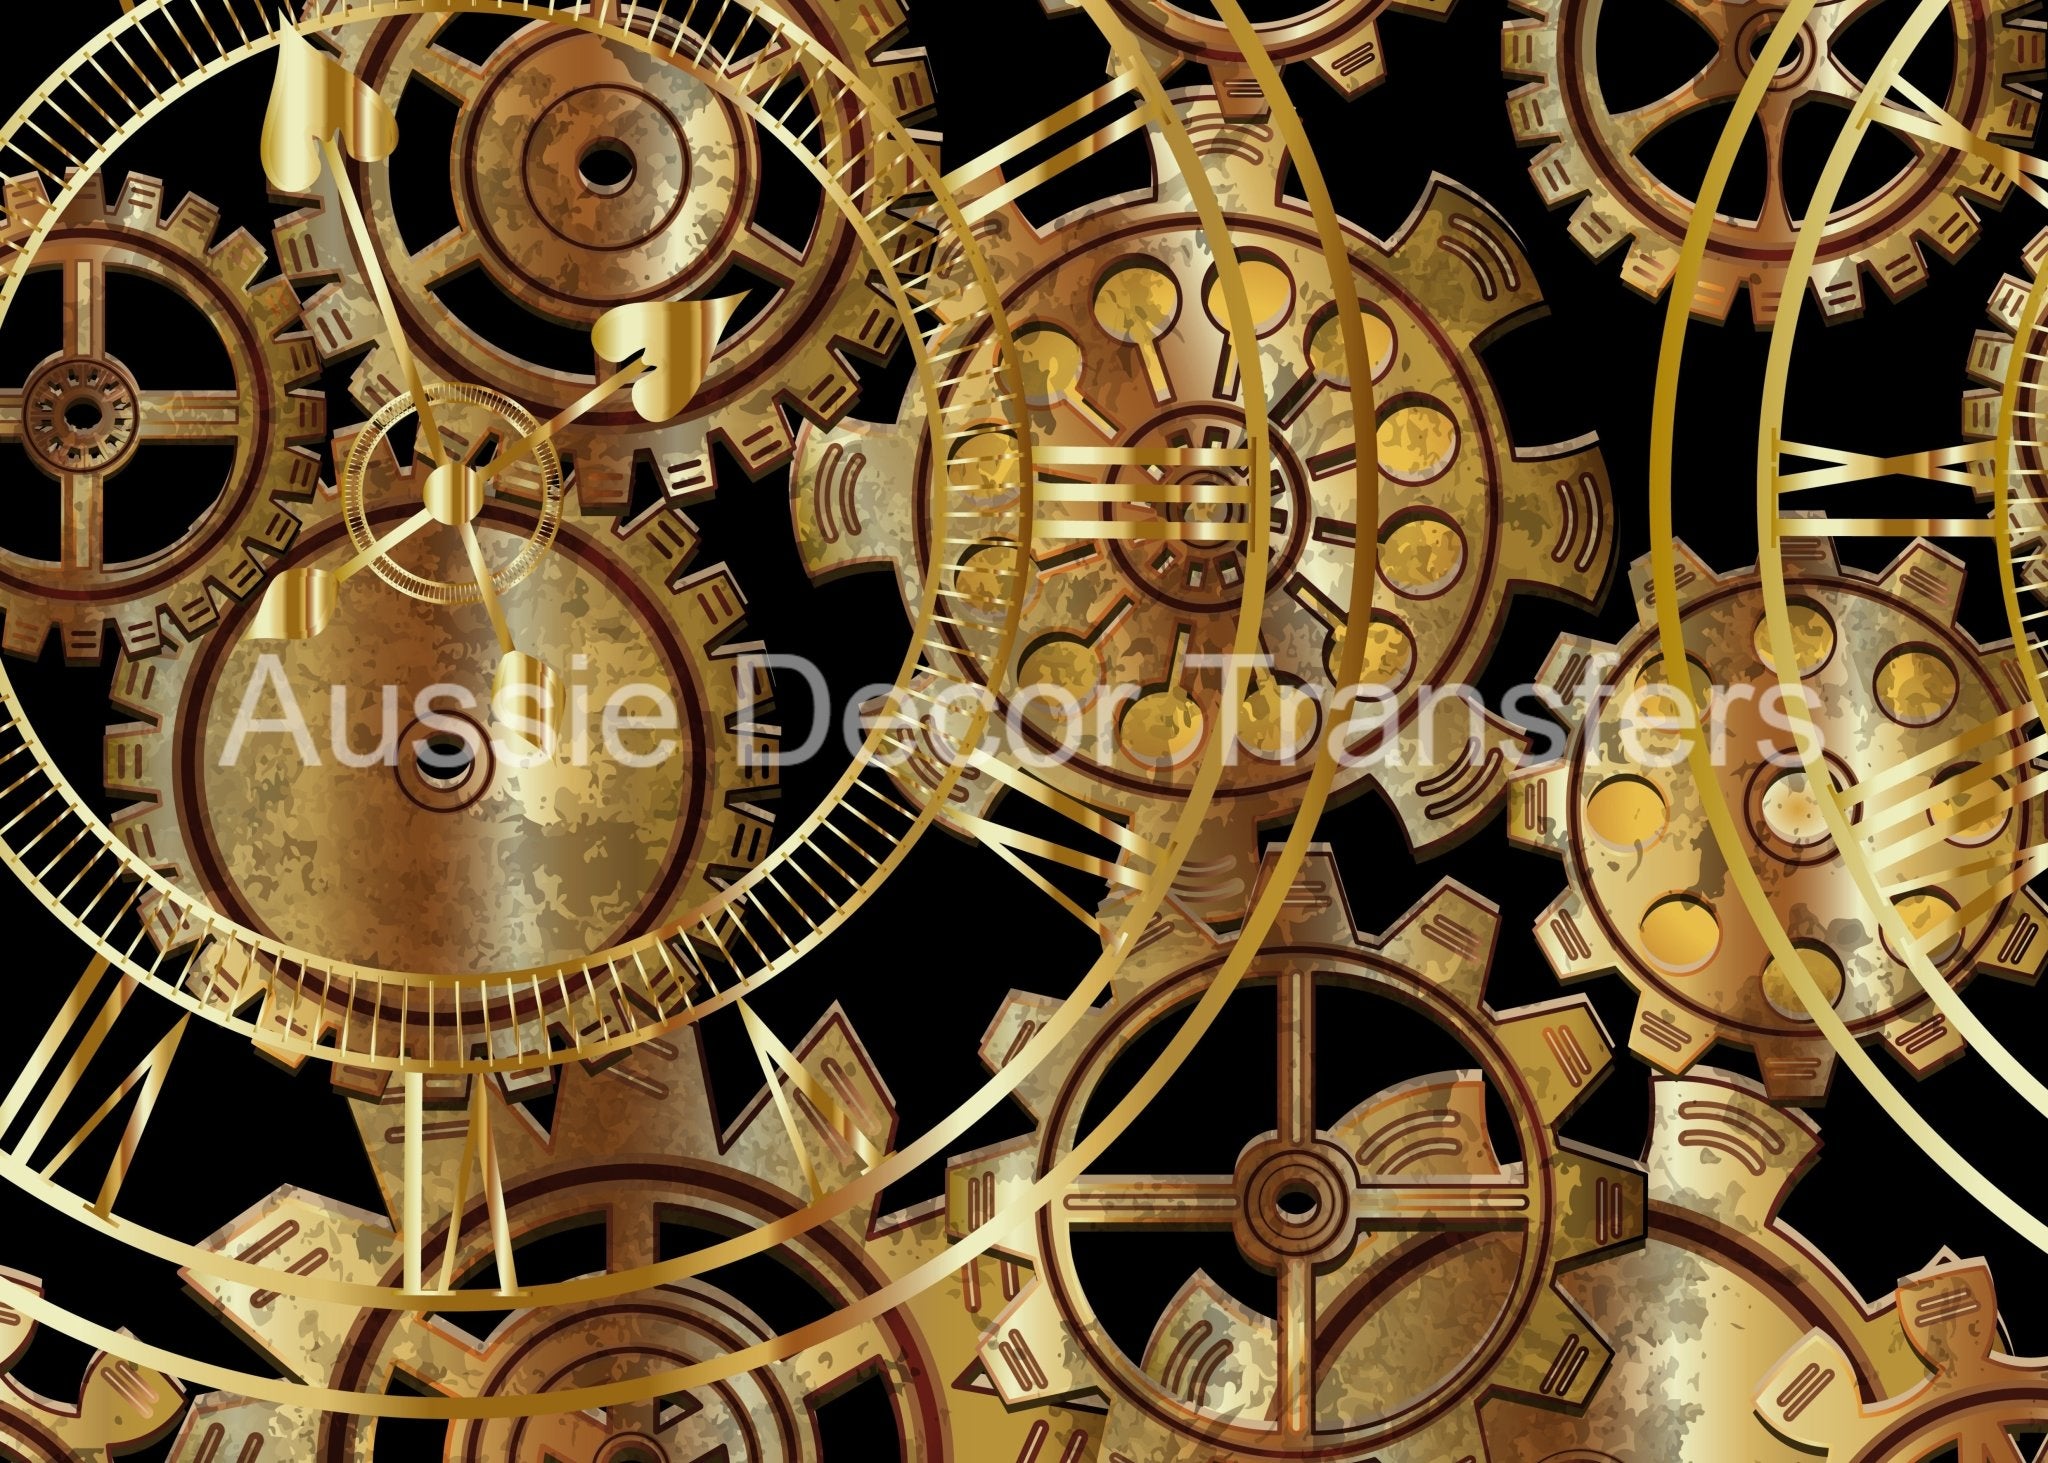 Aussie Decor Transfers Poster Print Steampunk Cogs - Not Your Average Poster Print! - AUS Only